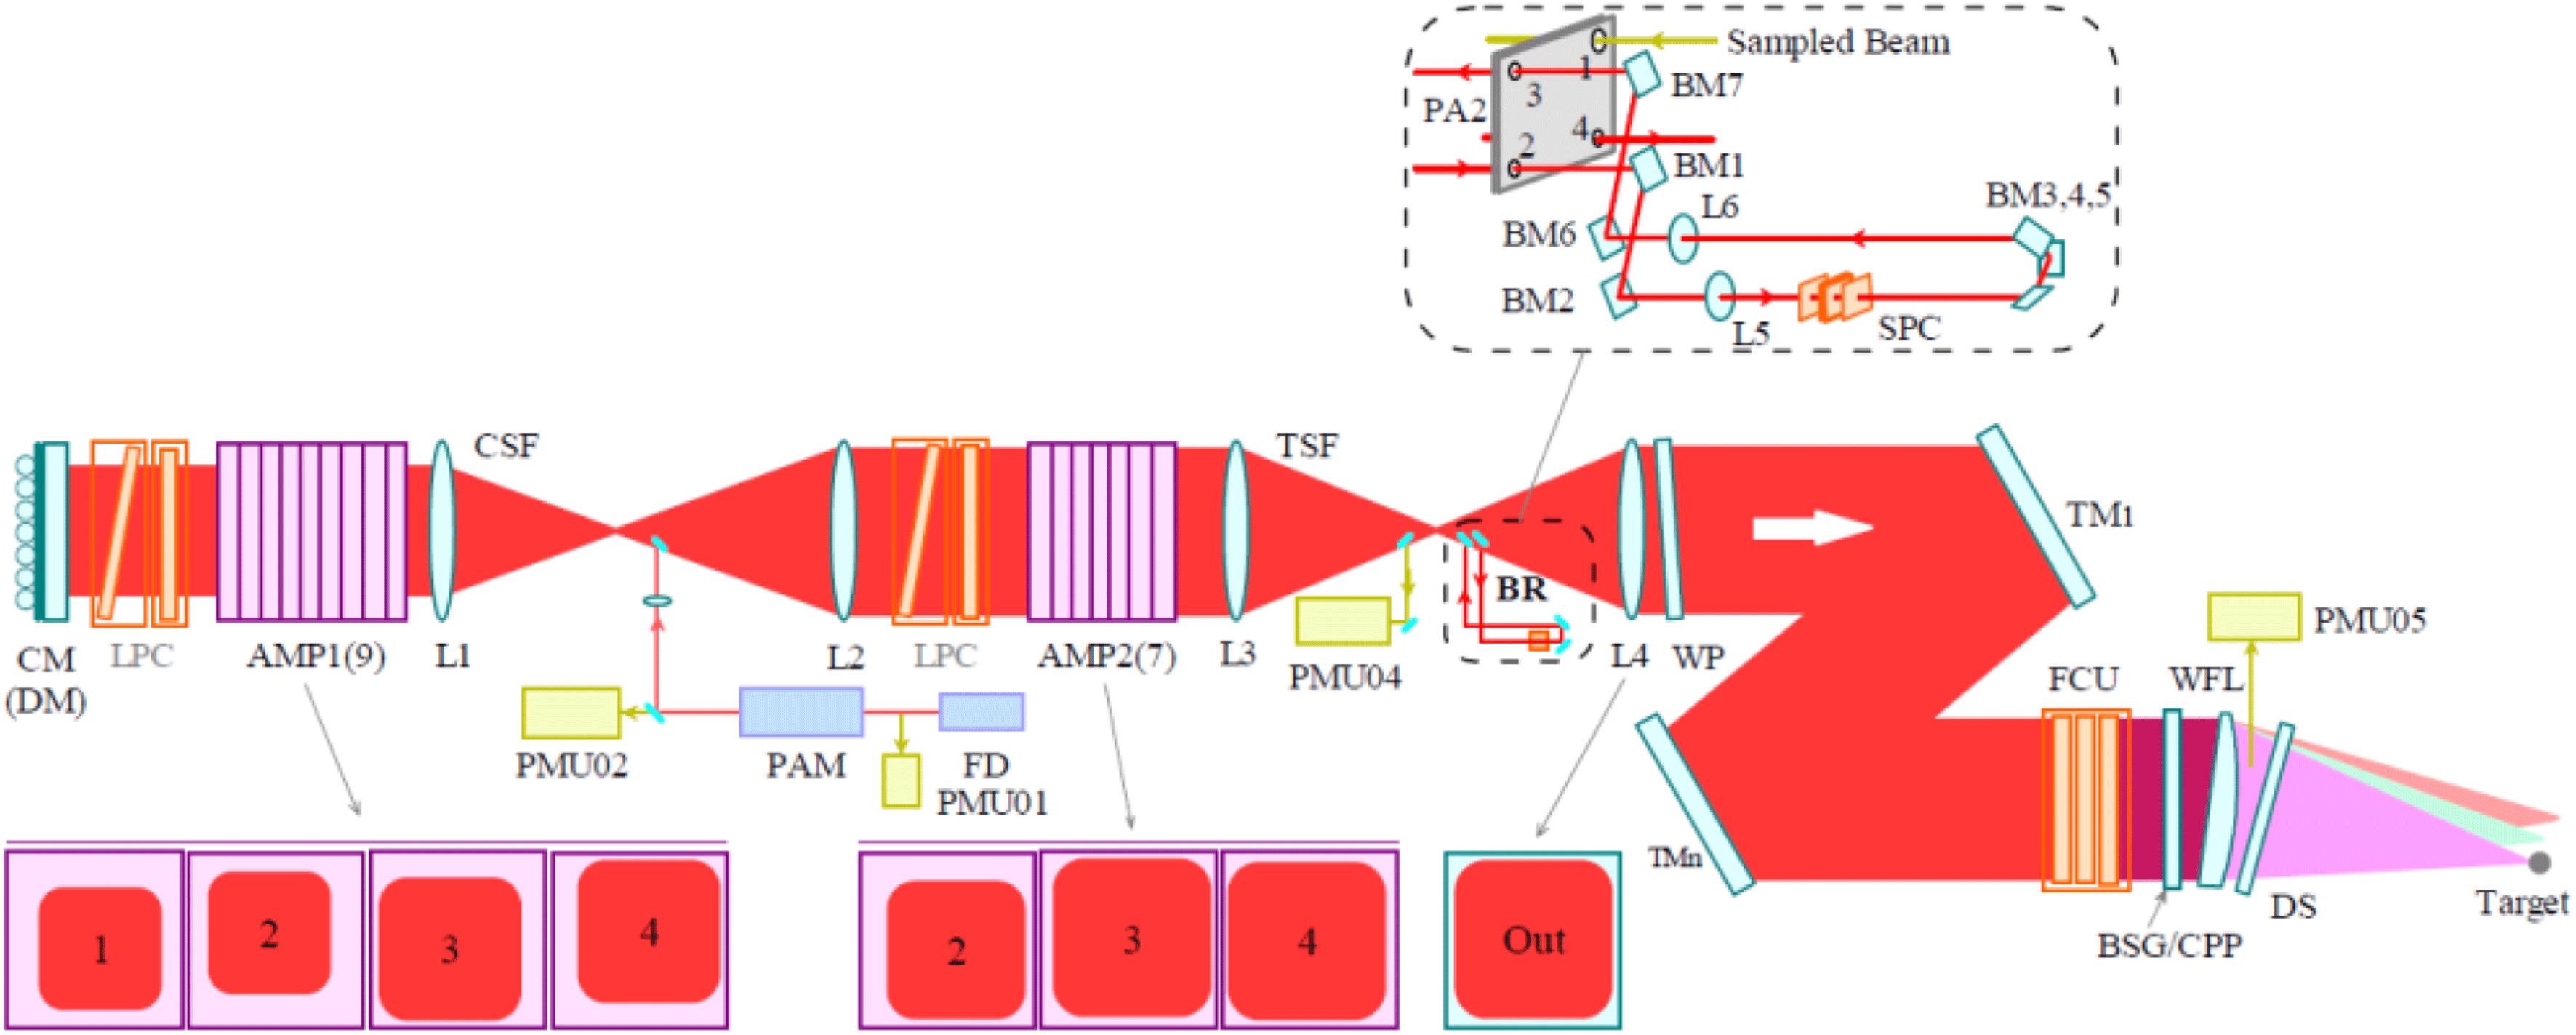 Schematic of one of the 48 beamlines in the SG-III laser facility. CM: cavity mirror; DM: deformable mirror; AMP: amplifier plate; L: lens; CSF/TSF: cavity/transport spatial filter; WP: wedge plate; TM: transport mirror; FCU: frequency conversion unit; BSG: beam sampling grating; CPP: continuous phase plate; WFL: wedged focus lens; PMU: parameter measurement unit; DS: debris shield; FD: front end; PAM: preamplifier; LPC: large pockels cell; BM: beam mirror; BR: beam reverser.